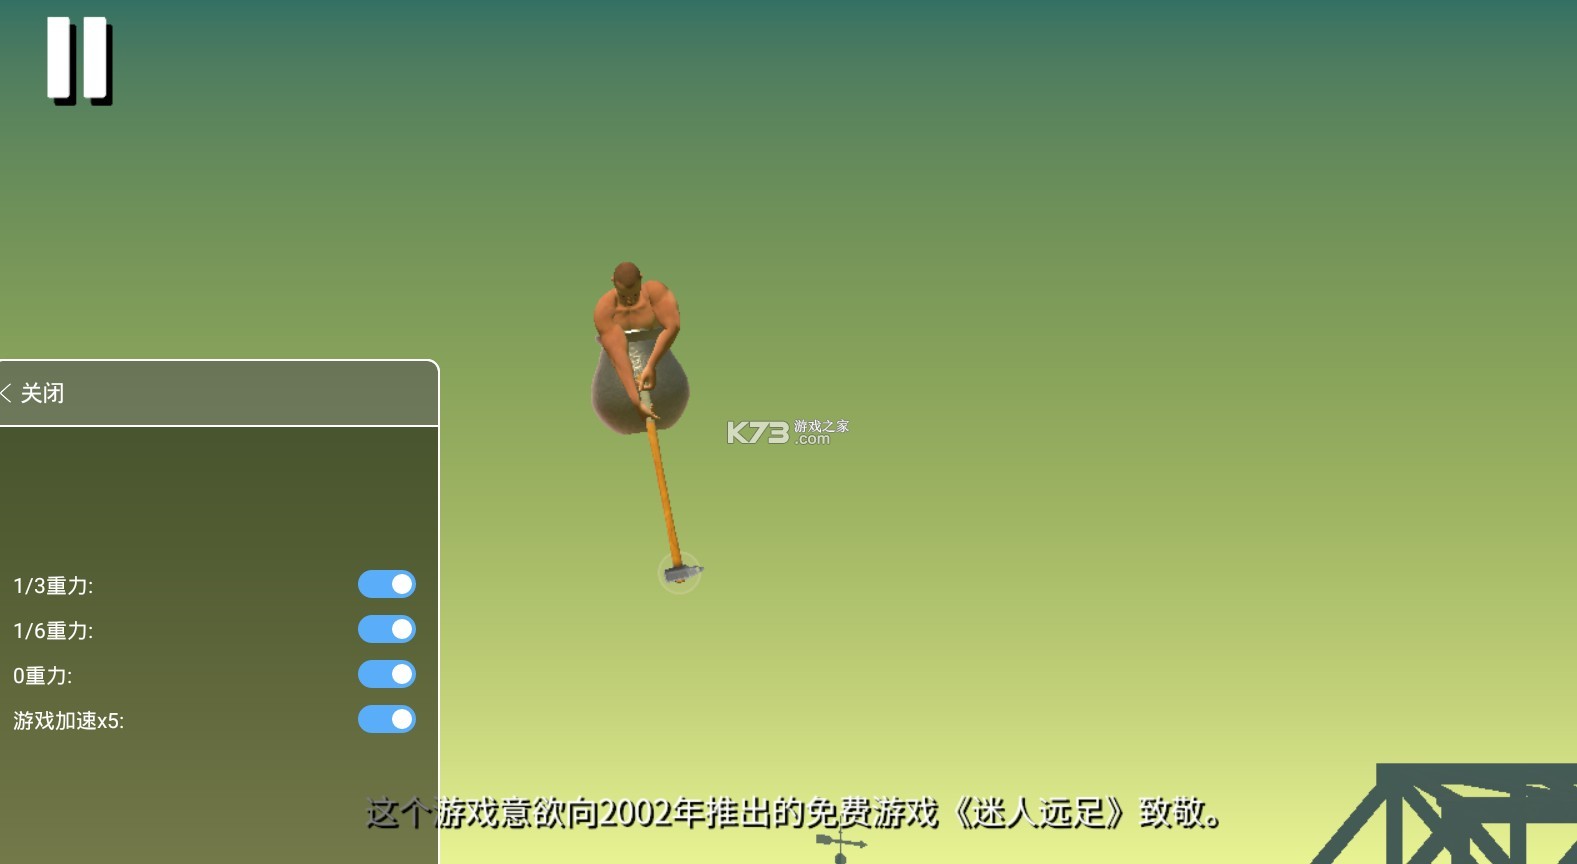 getting over itİ޹-getting over itϷ޹v1.9.4׿޹